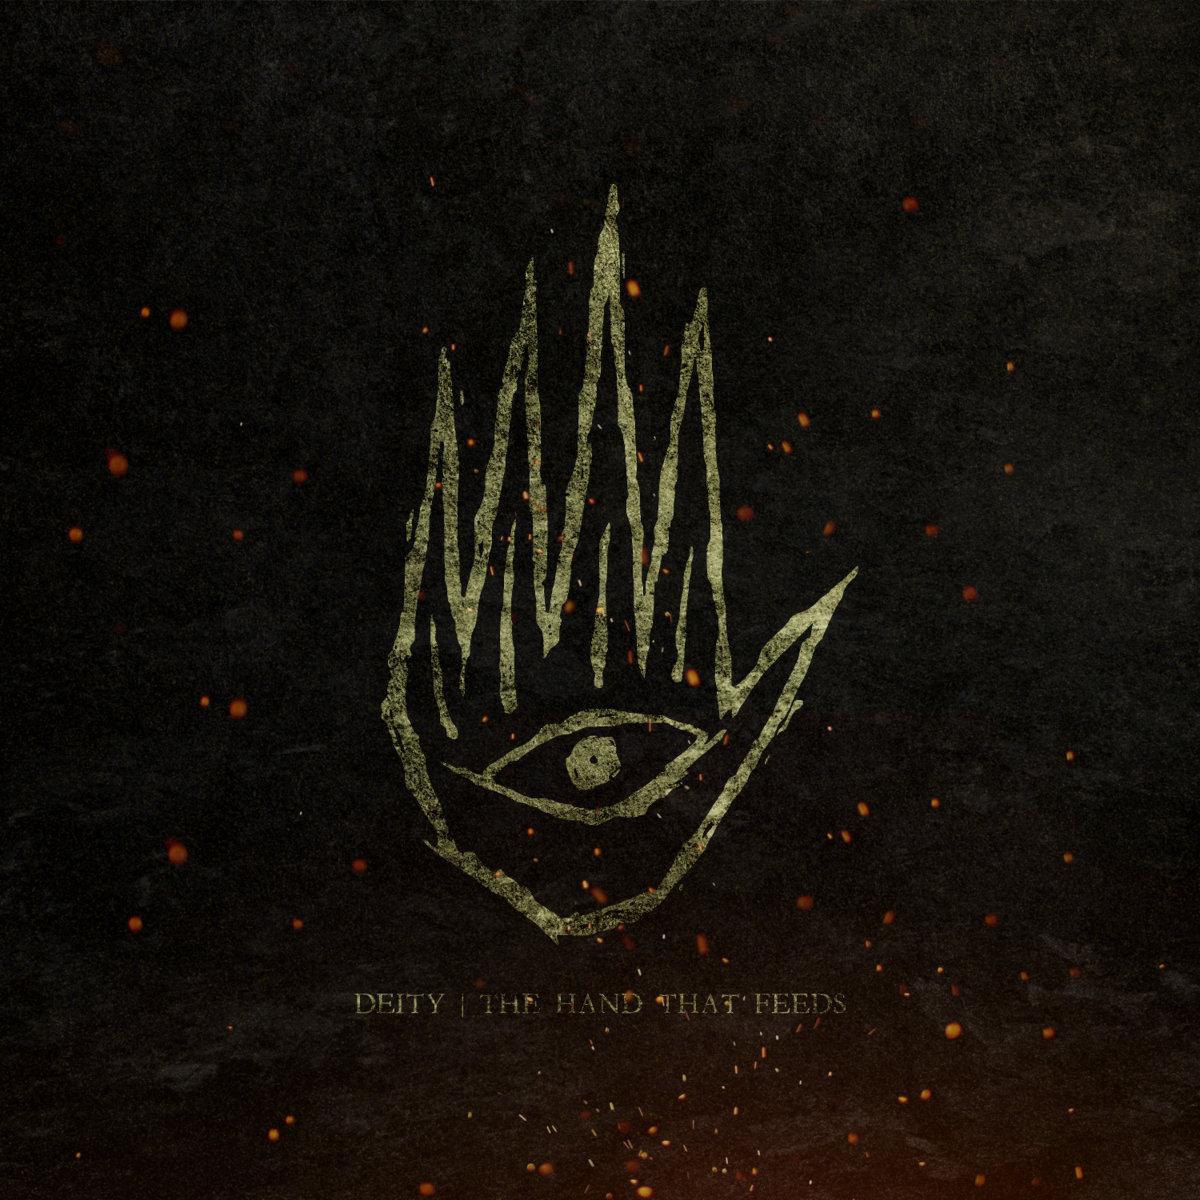 Deity - The Hand That Feeds (EP) (2015, Deathcore) - Download for free via torrent - Metal Tracker